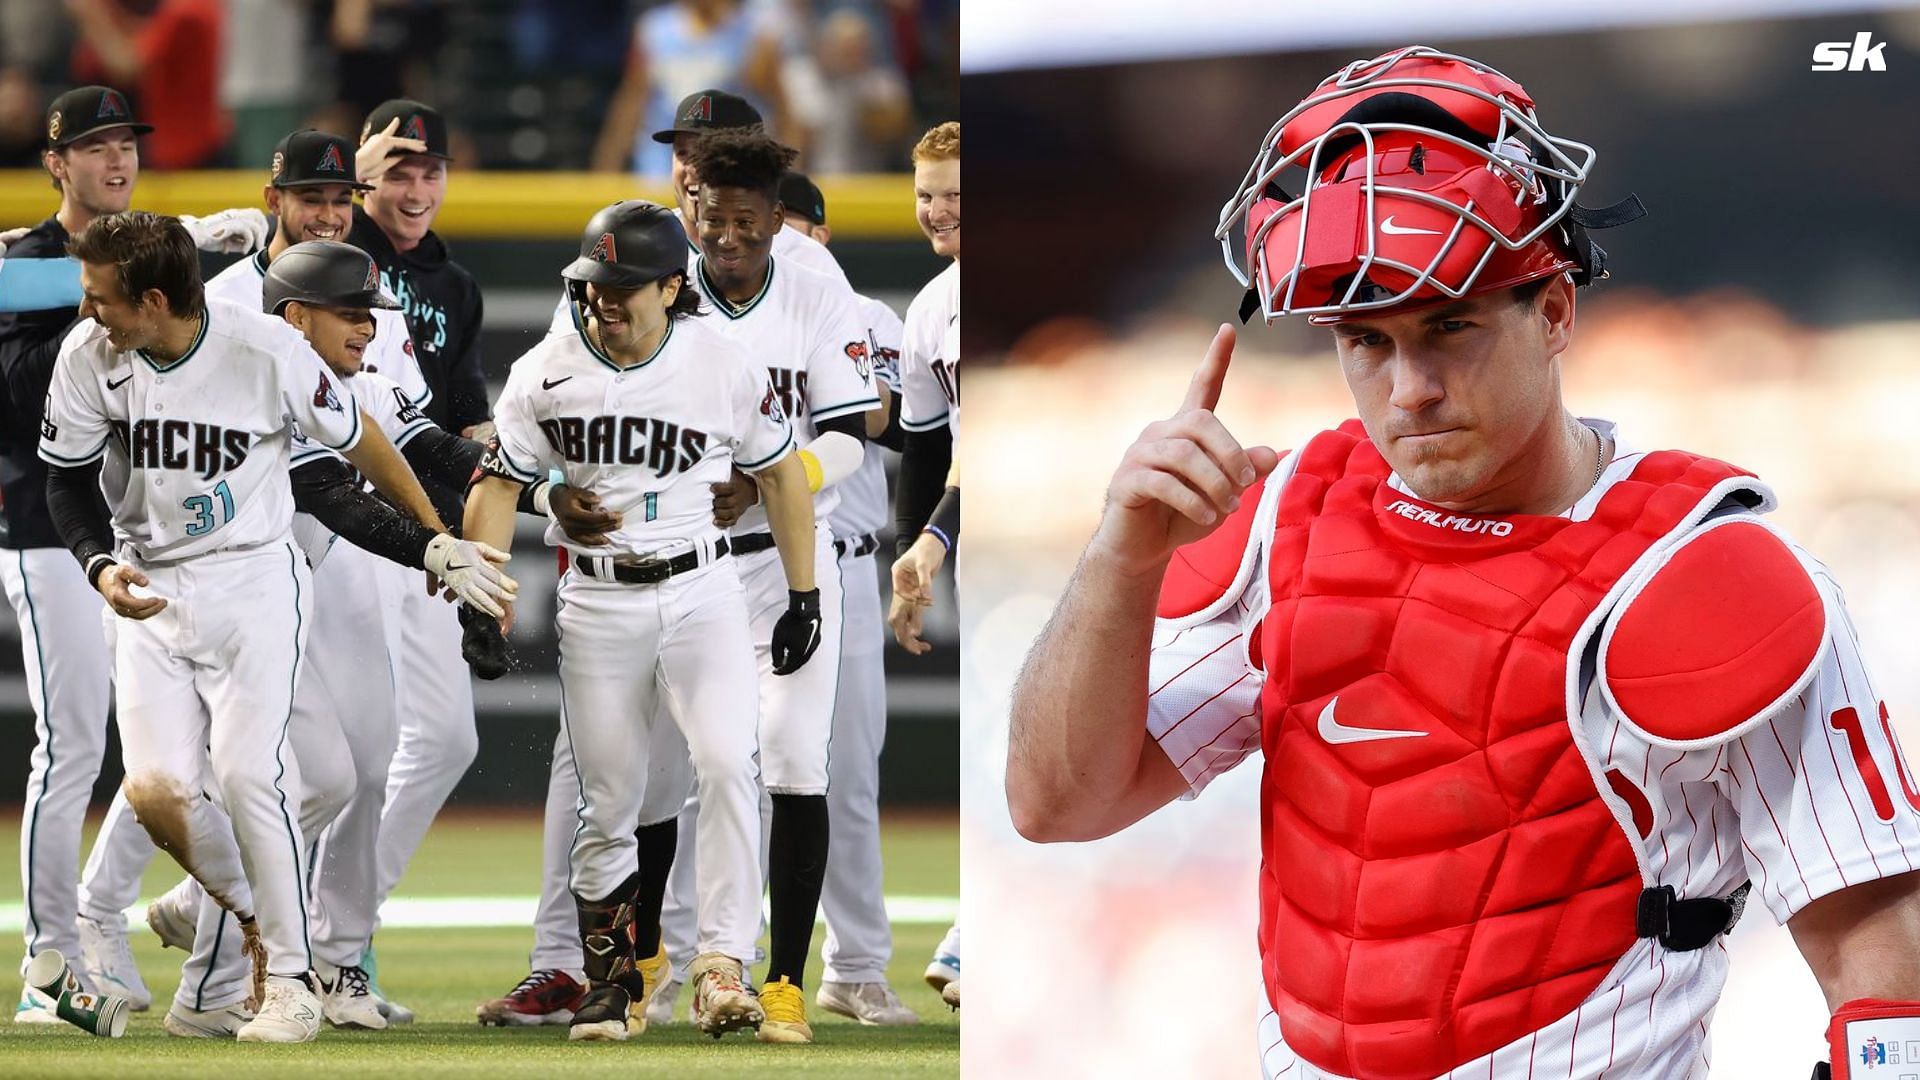 JT Realmuto is all praise for the D-Backs ahead of their NLCS clash 